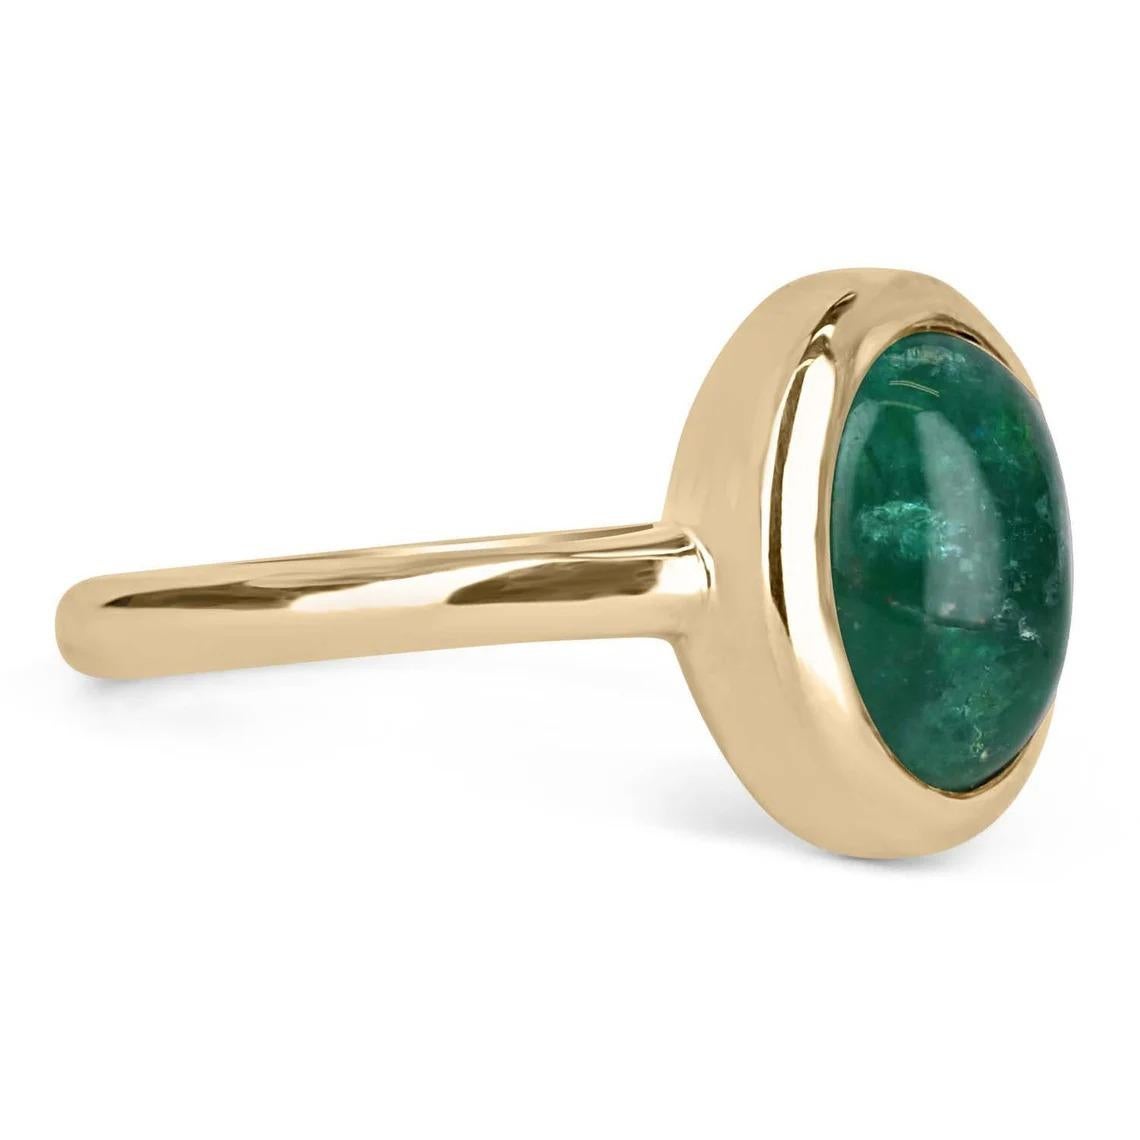 A bezel-set emerald cabochon ring in 14K yellow gold. Featured here is this lovely 3.82-carat natural, earth-mined, emerald cabochon. This stone displays a gorgeous, dark green color, and very good luster. This natural beauty is set in a 14K yellow